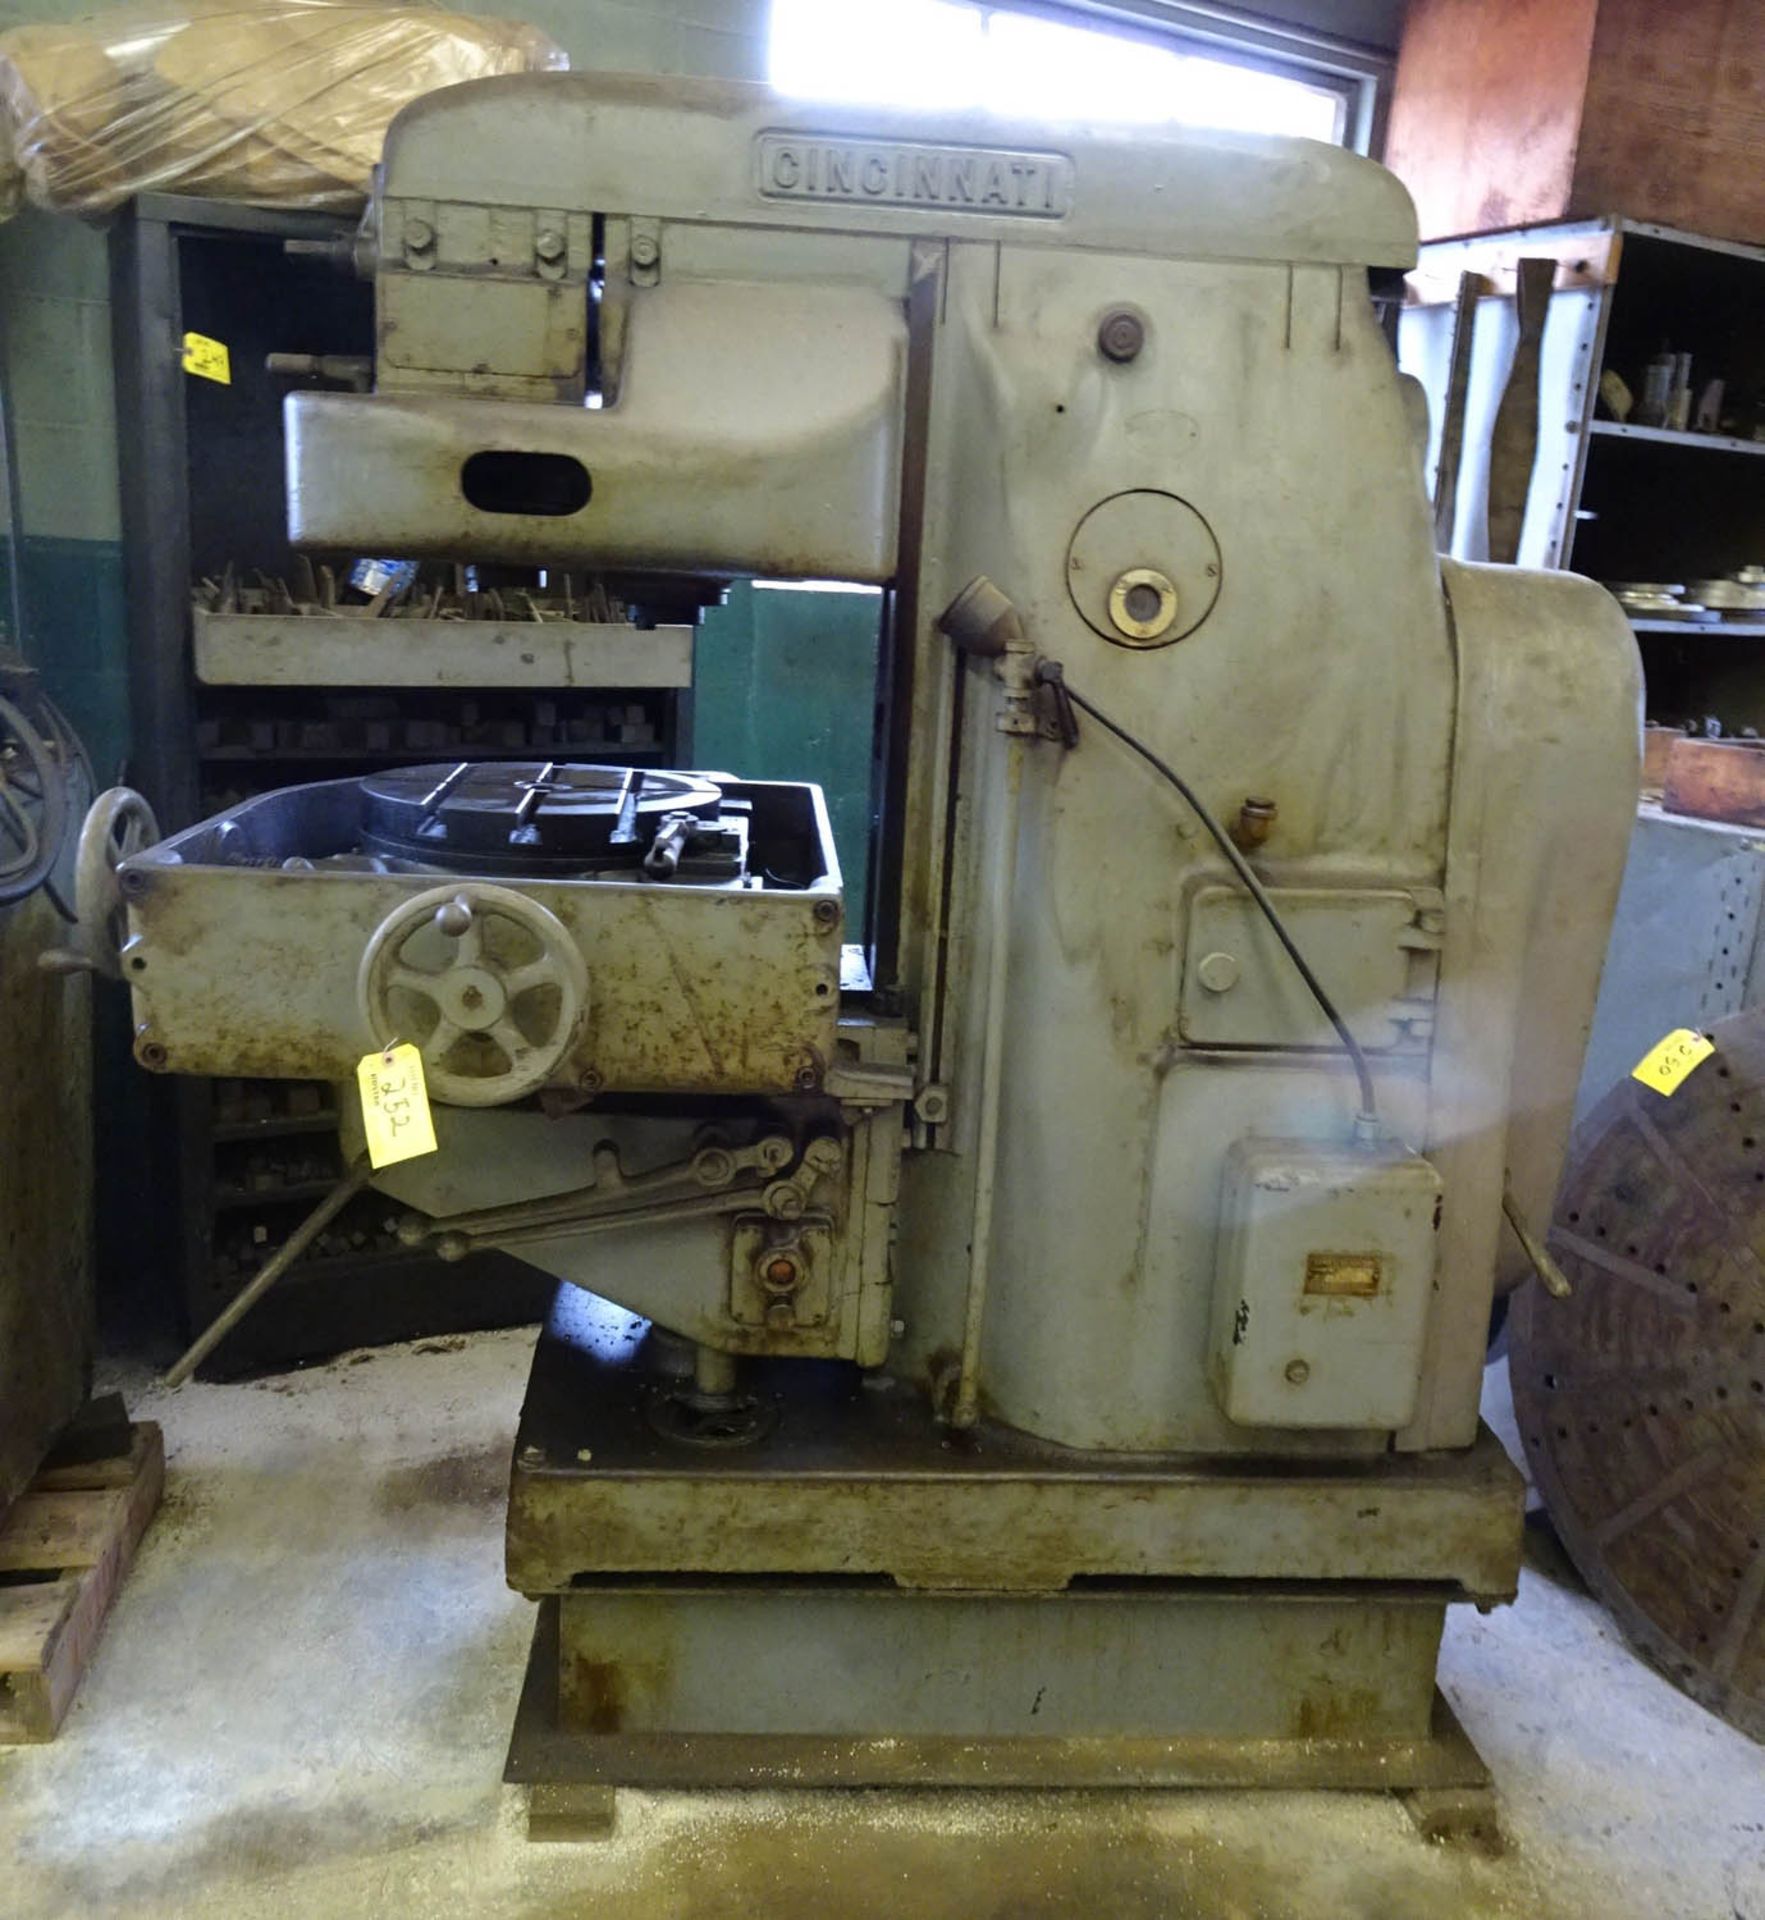 CINCINNATI MDL. NO. 2MH VERTICAL MILLING MACHINE, WITH ROTARY TABLE, VARIABLE SPEED, S/N 5A2P1H-13